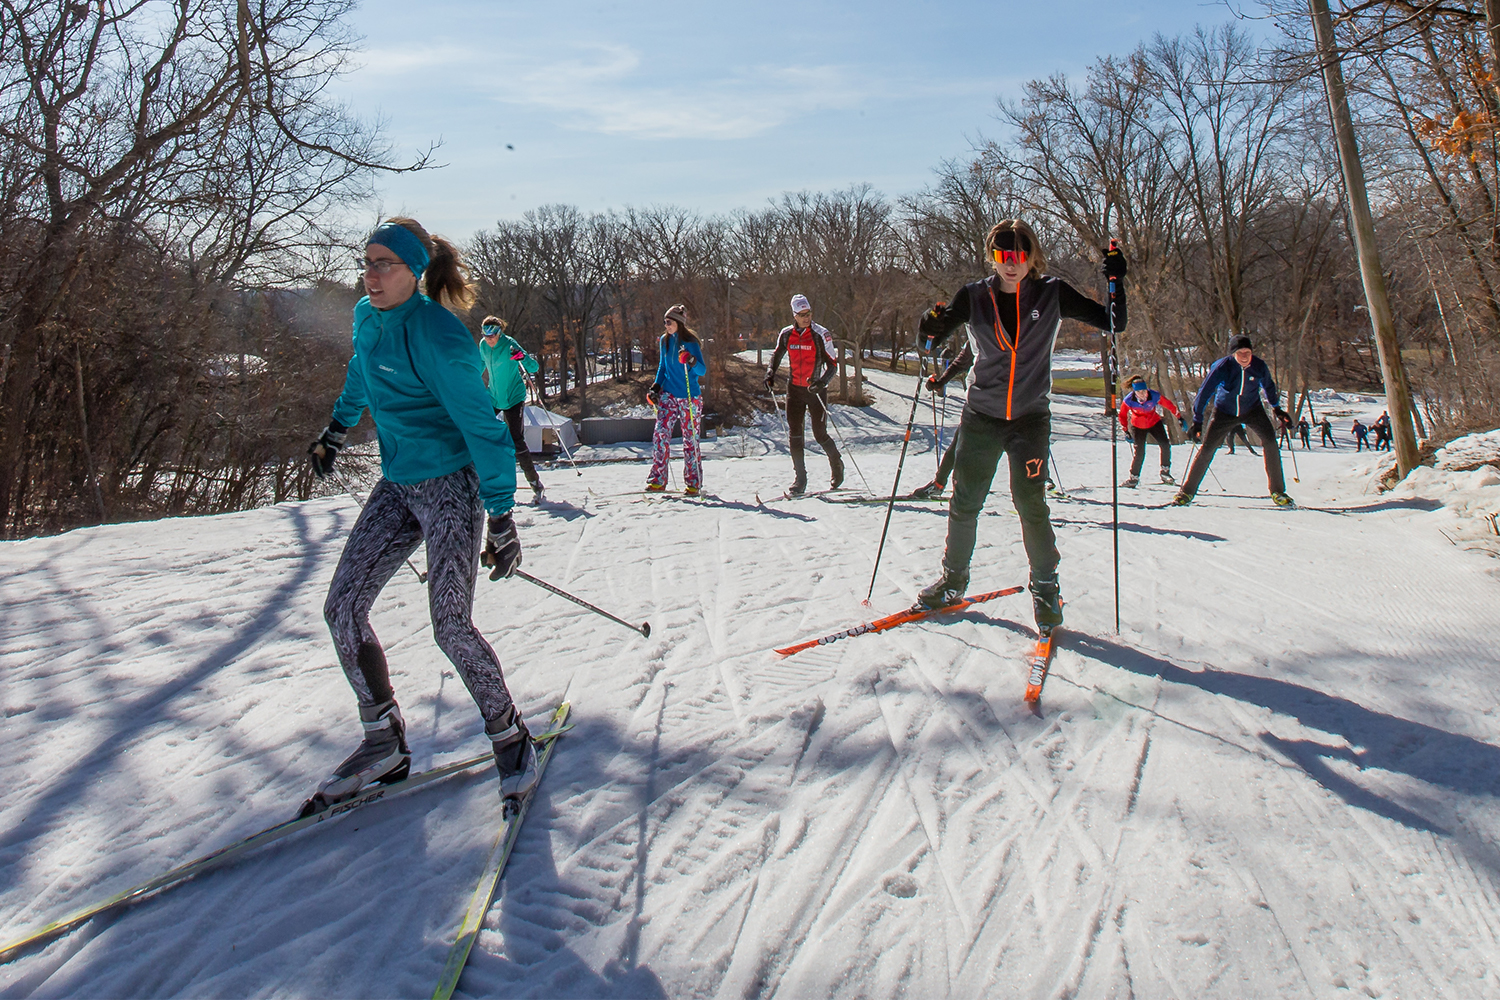 A group of skiers on Minneapolis cross-country trails